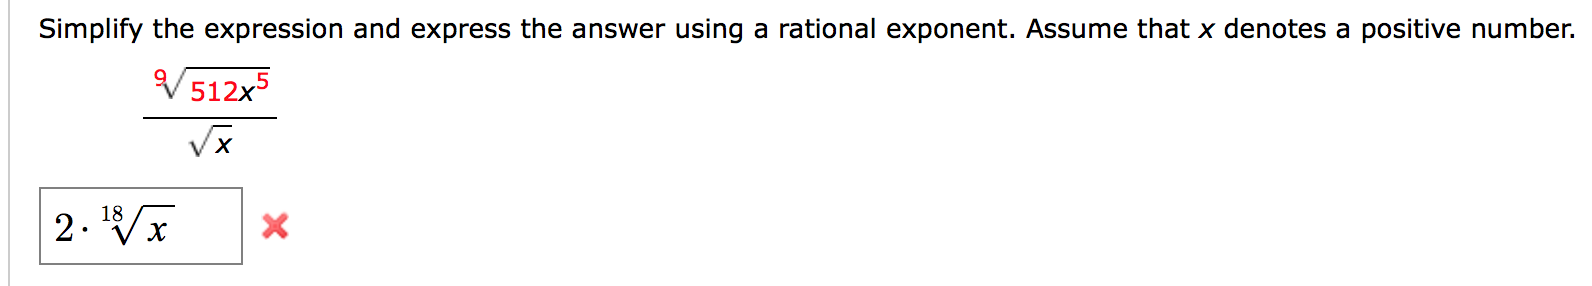 Simplify the expression and express the answer using a rational exponent. Assume that x denotes a positive number.
V512x5
